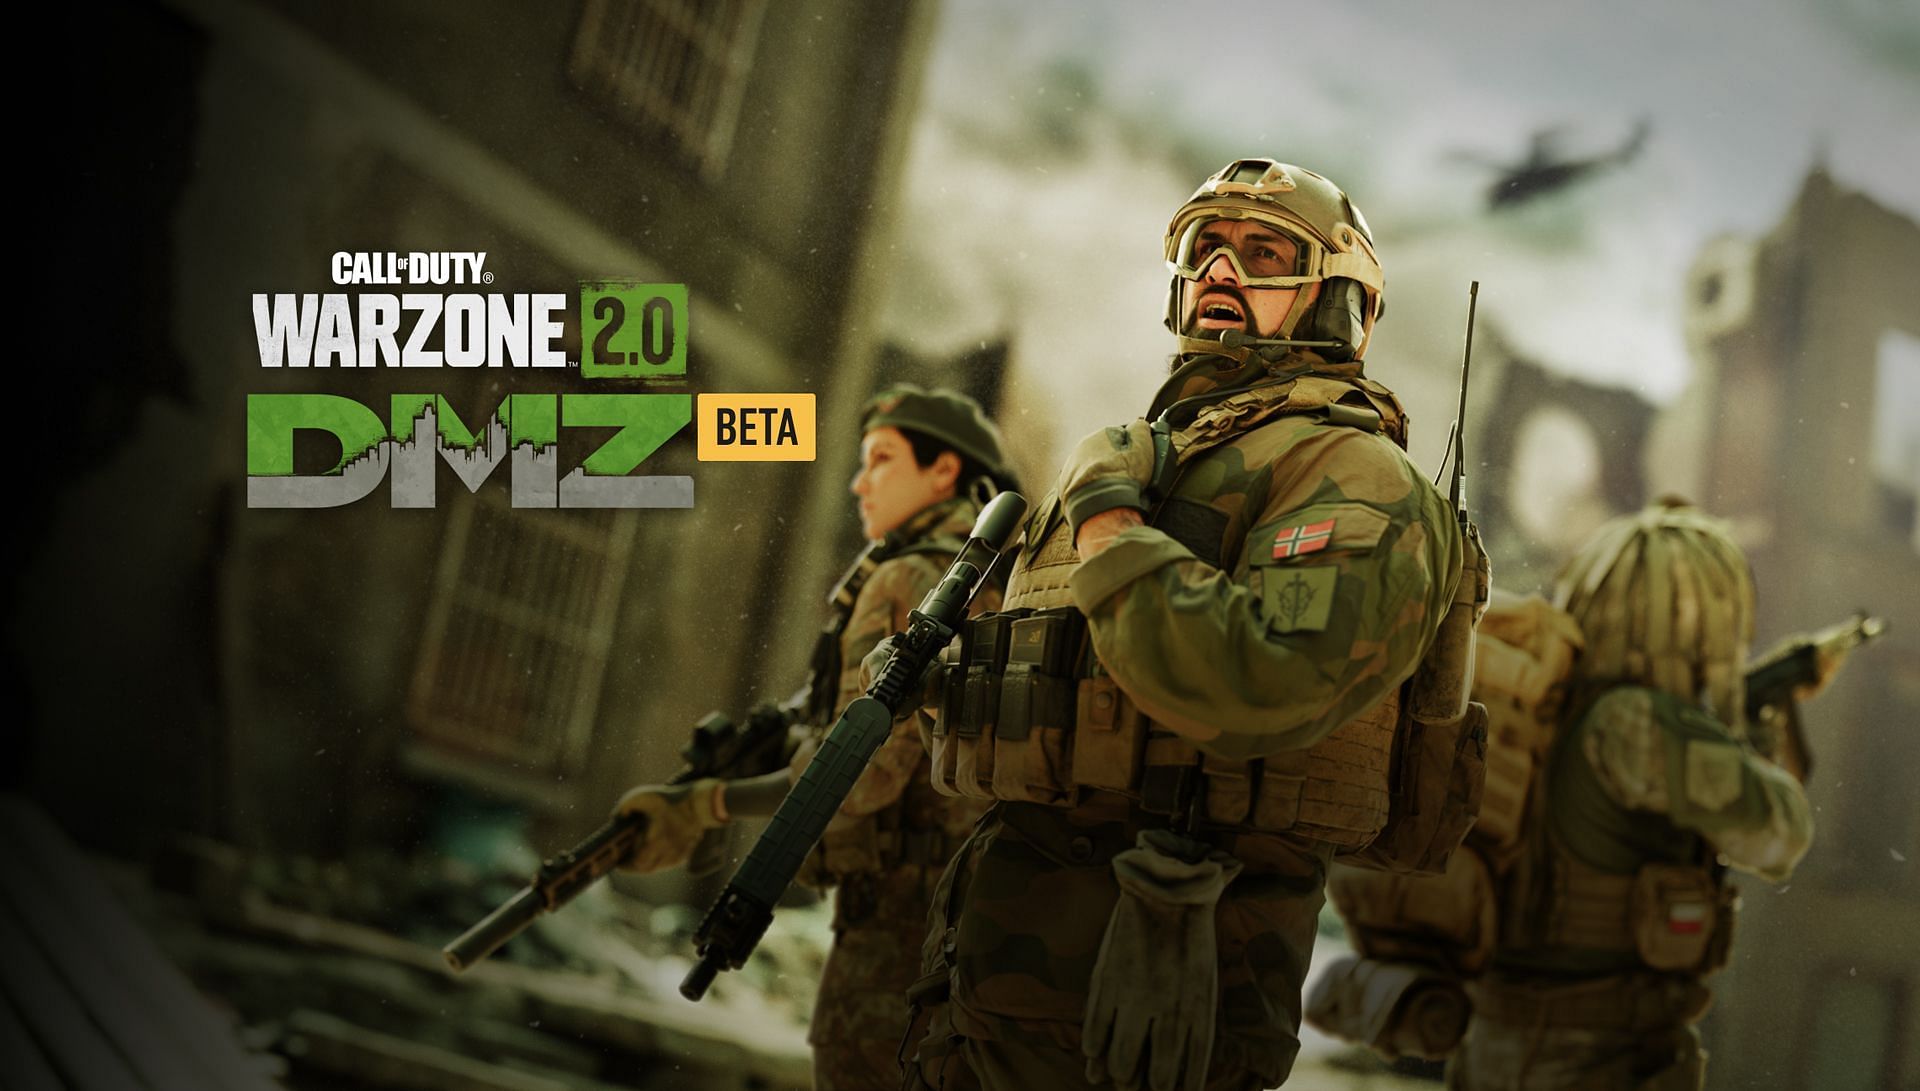 DMZ will receive some major changes in season 2 update of Warzone 2 (Image via Activision)